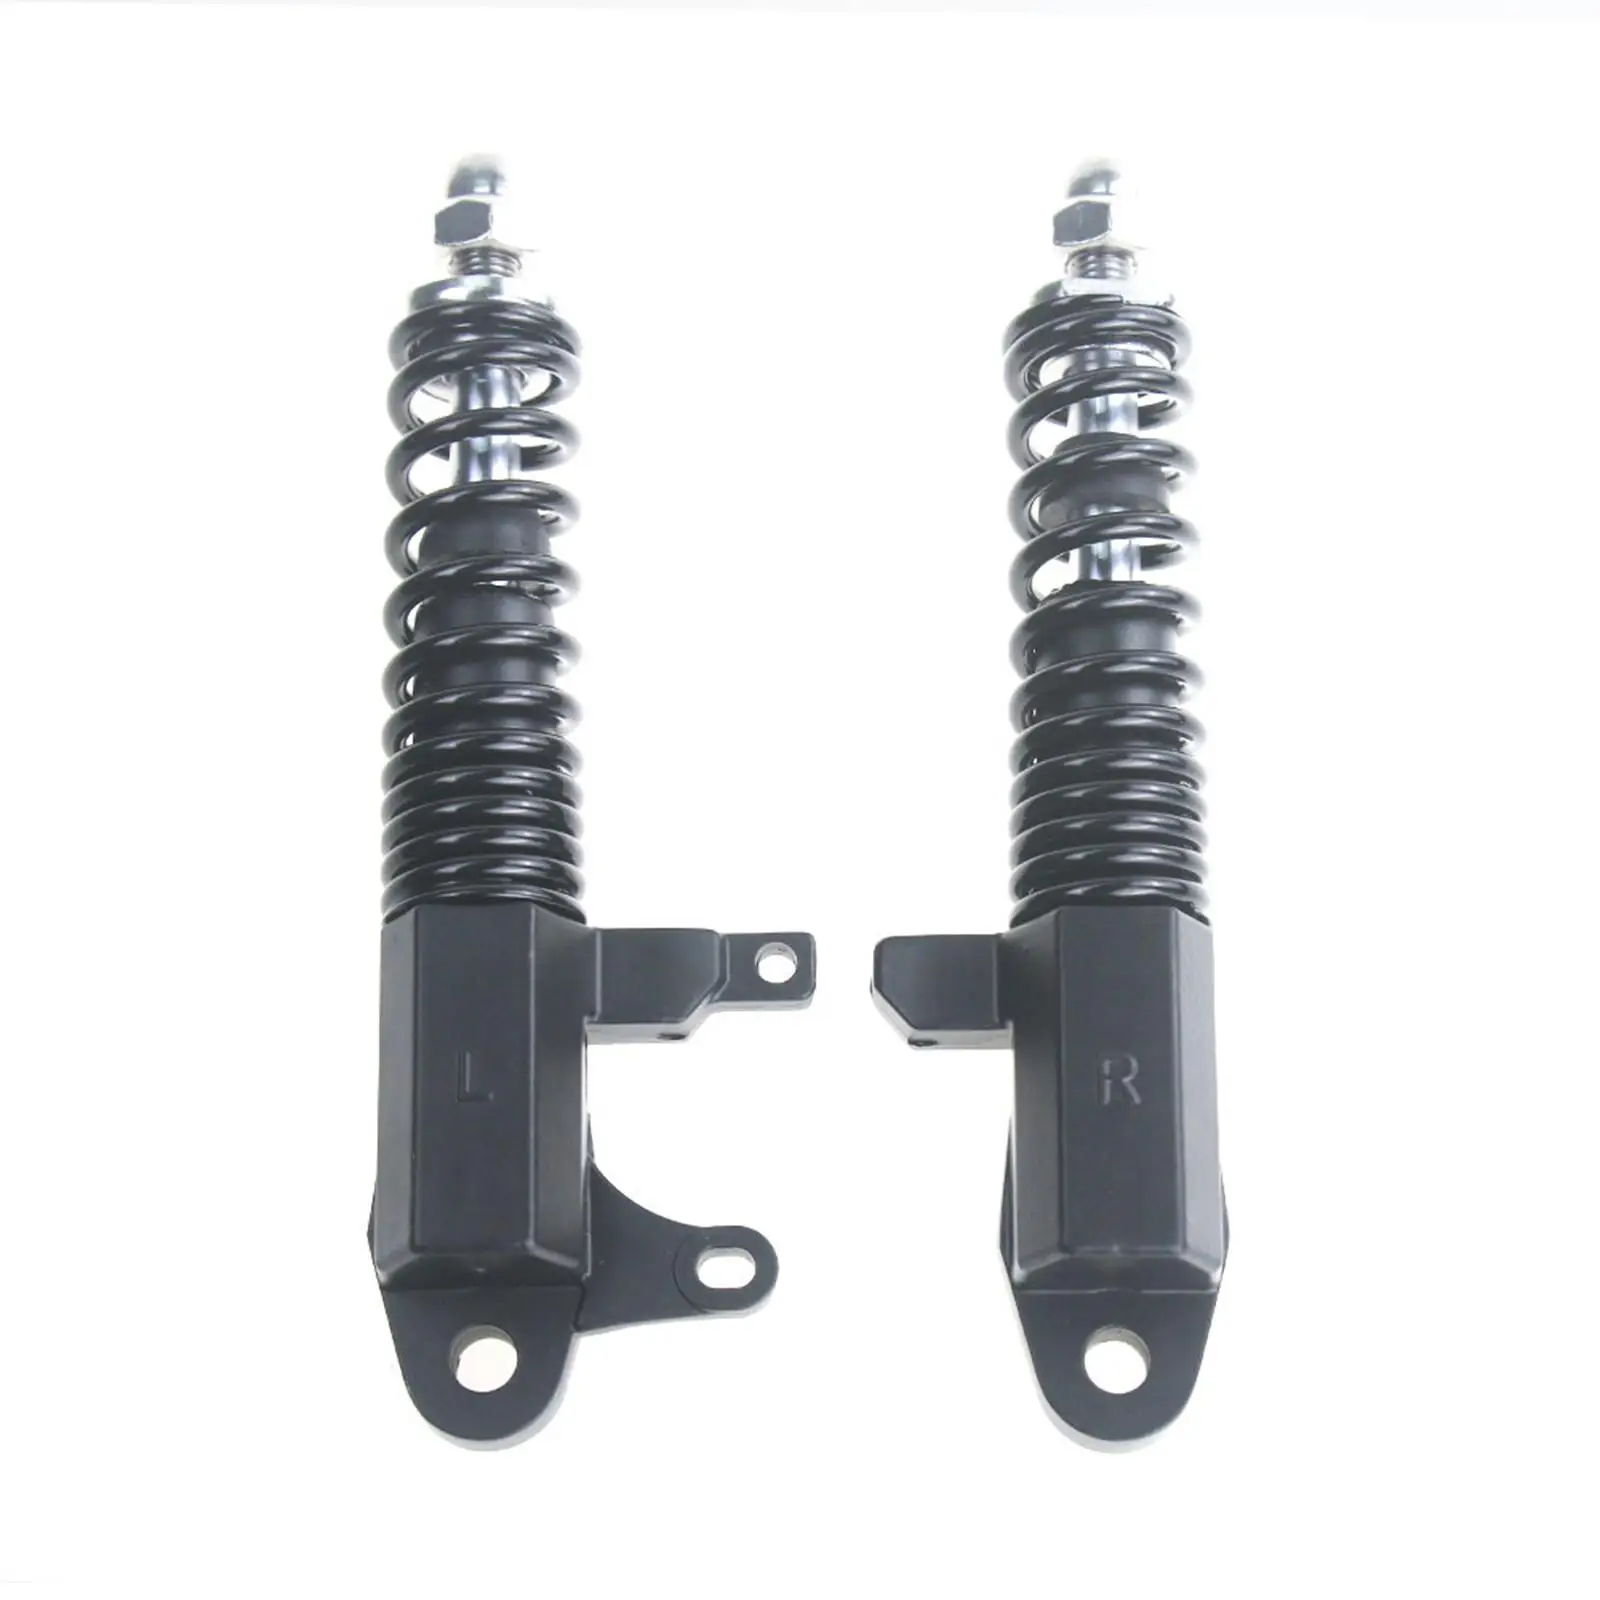 2x Front Fork Shock Absorber 10inch Premium Aluminum Alloy Durable for M4 Pro M12